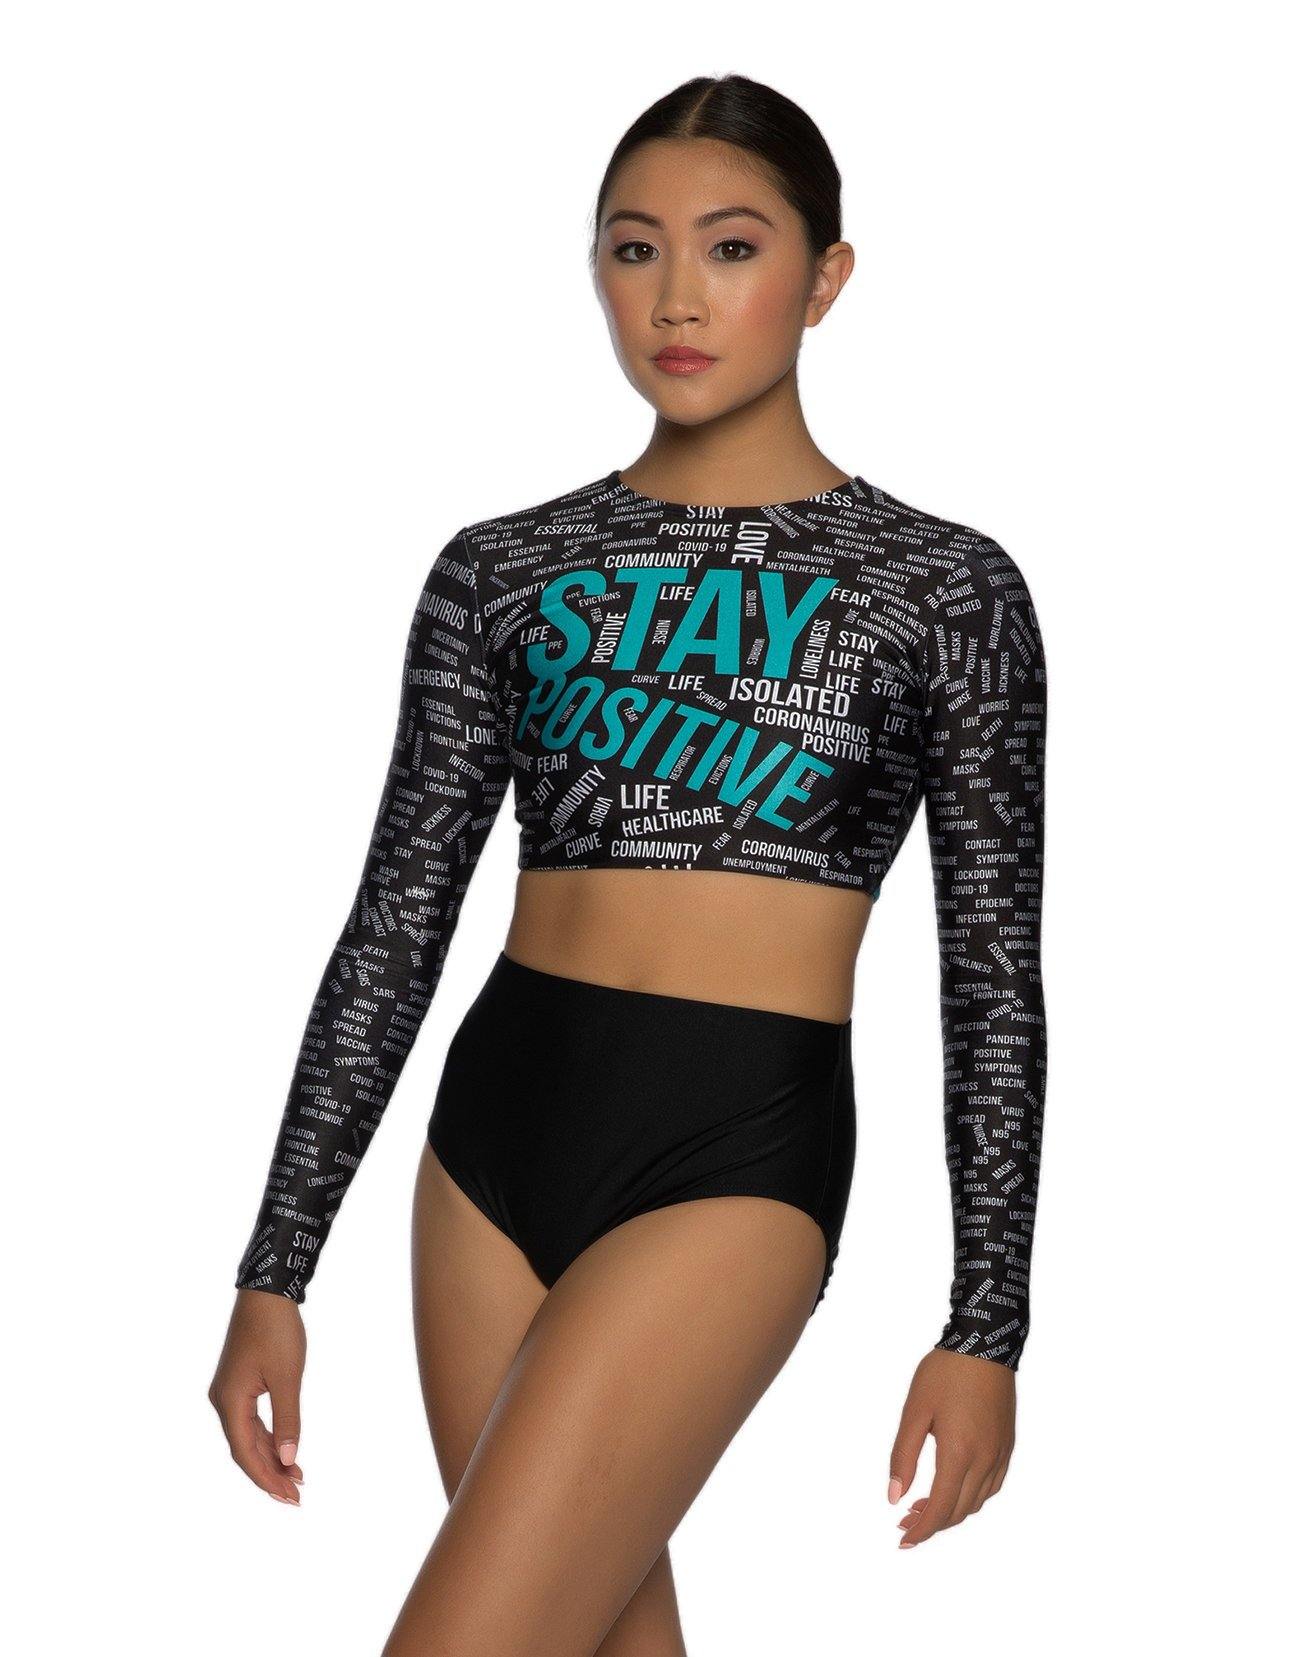 Stay Positive LS Triangle Back Crop Top - Hamilton Theatrical